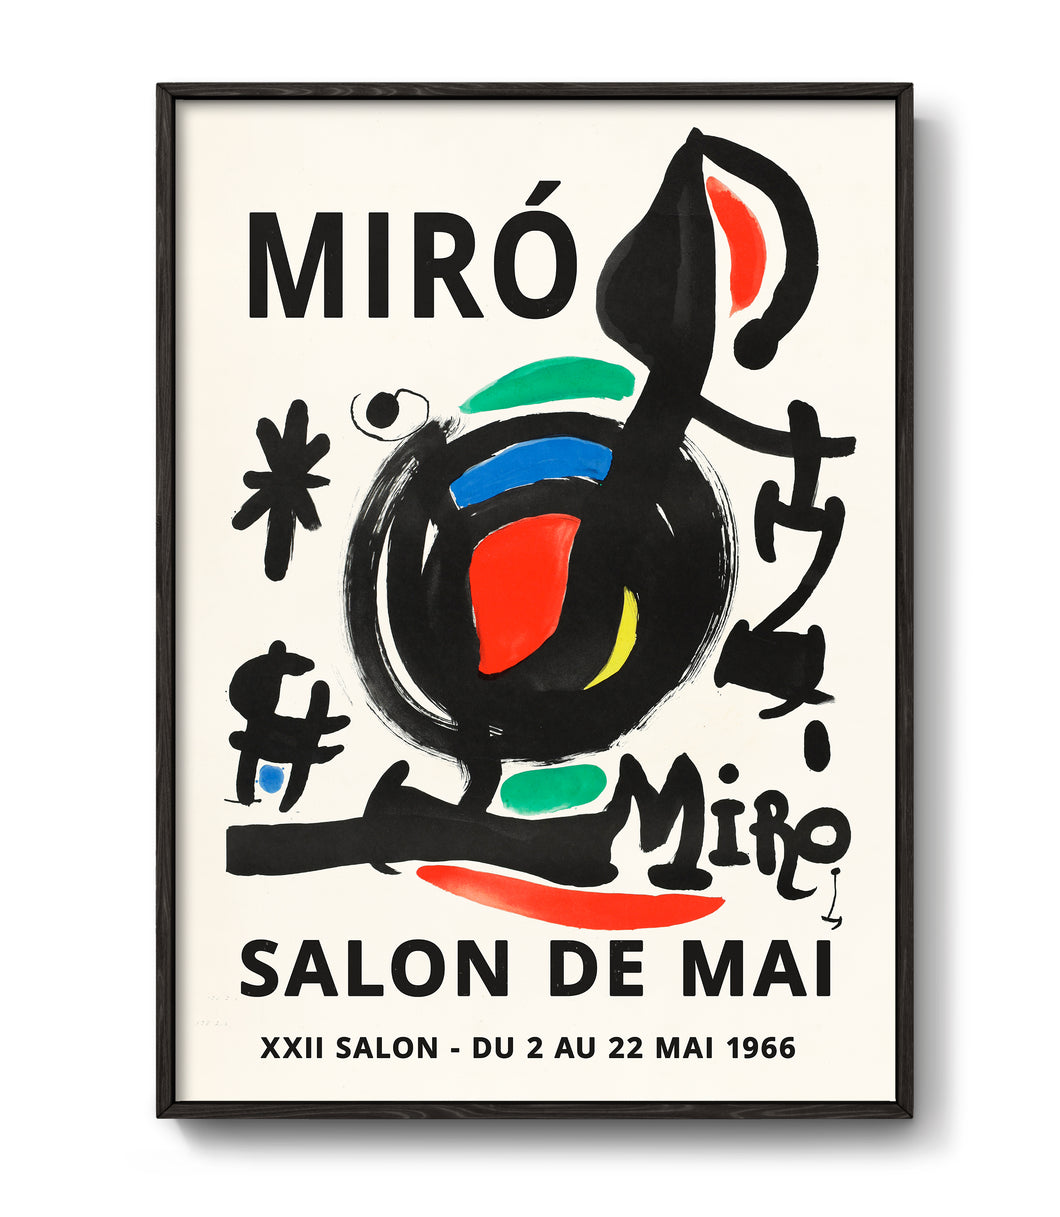 Exhibition poster by Joan Miró